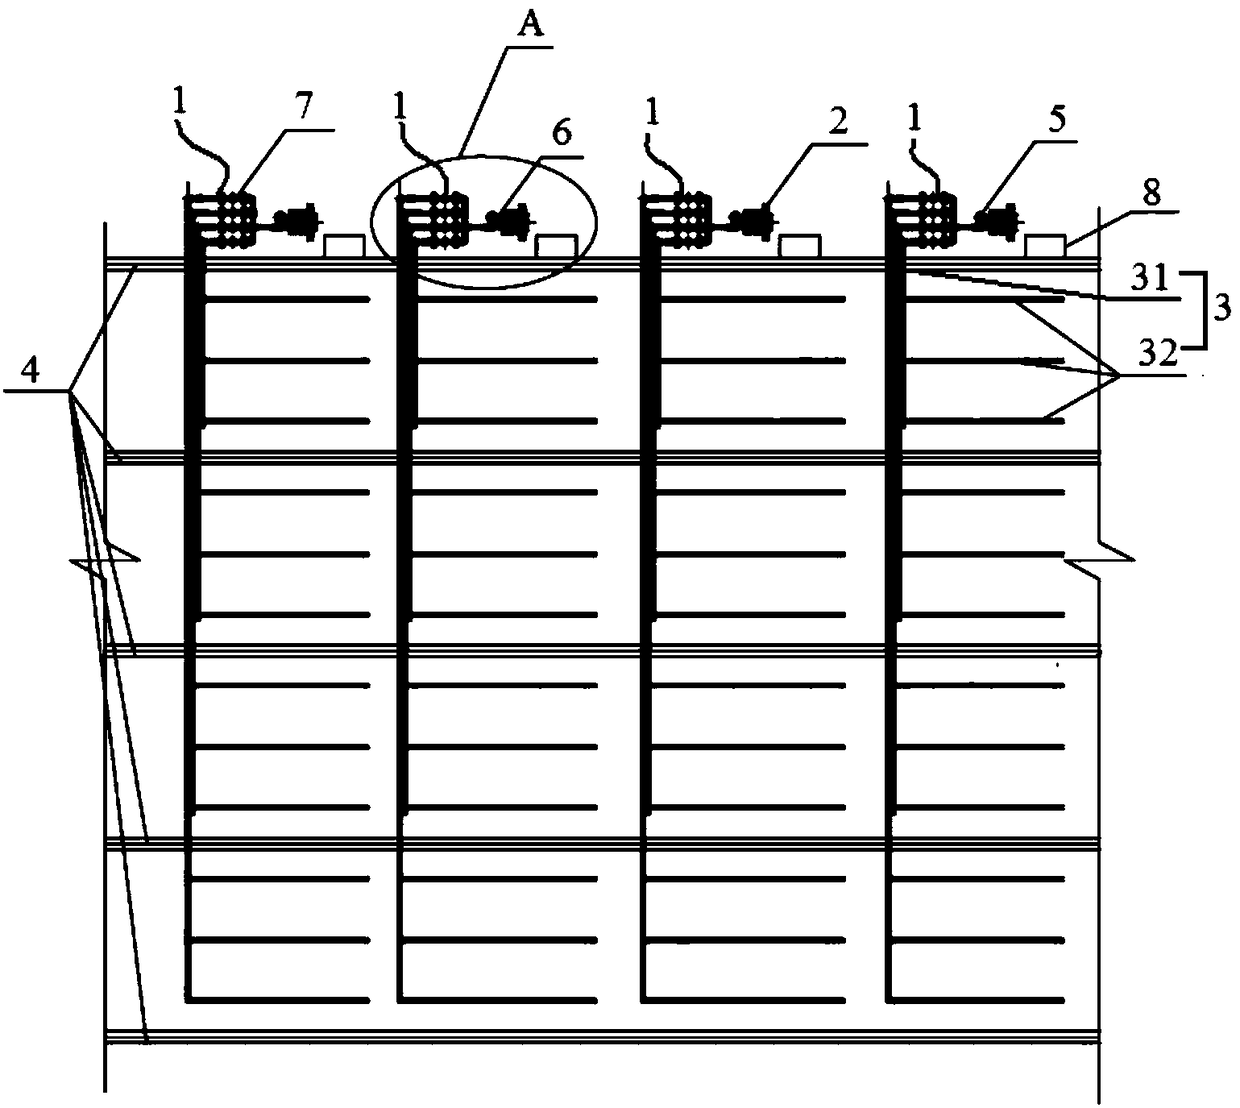 Composting ventilation and aeration system